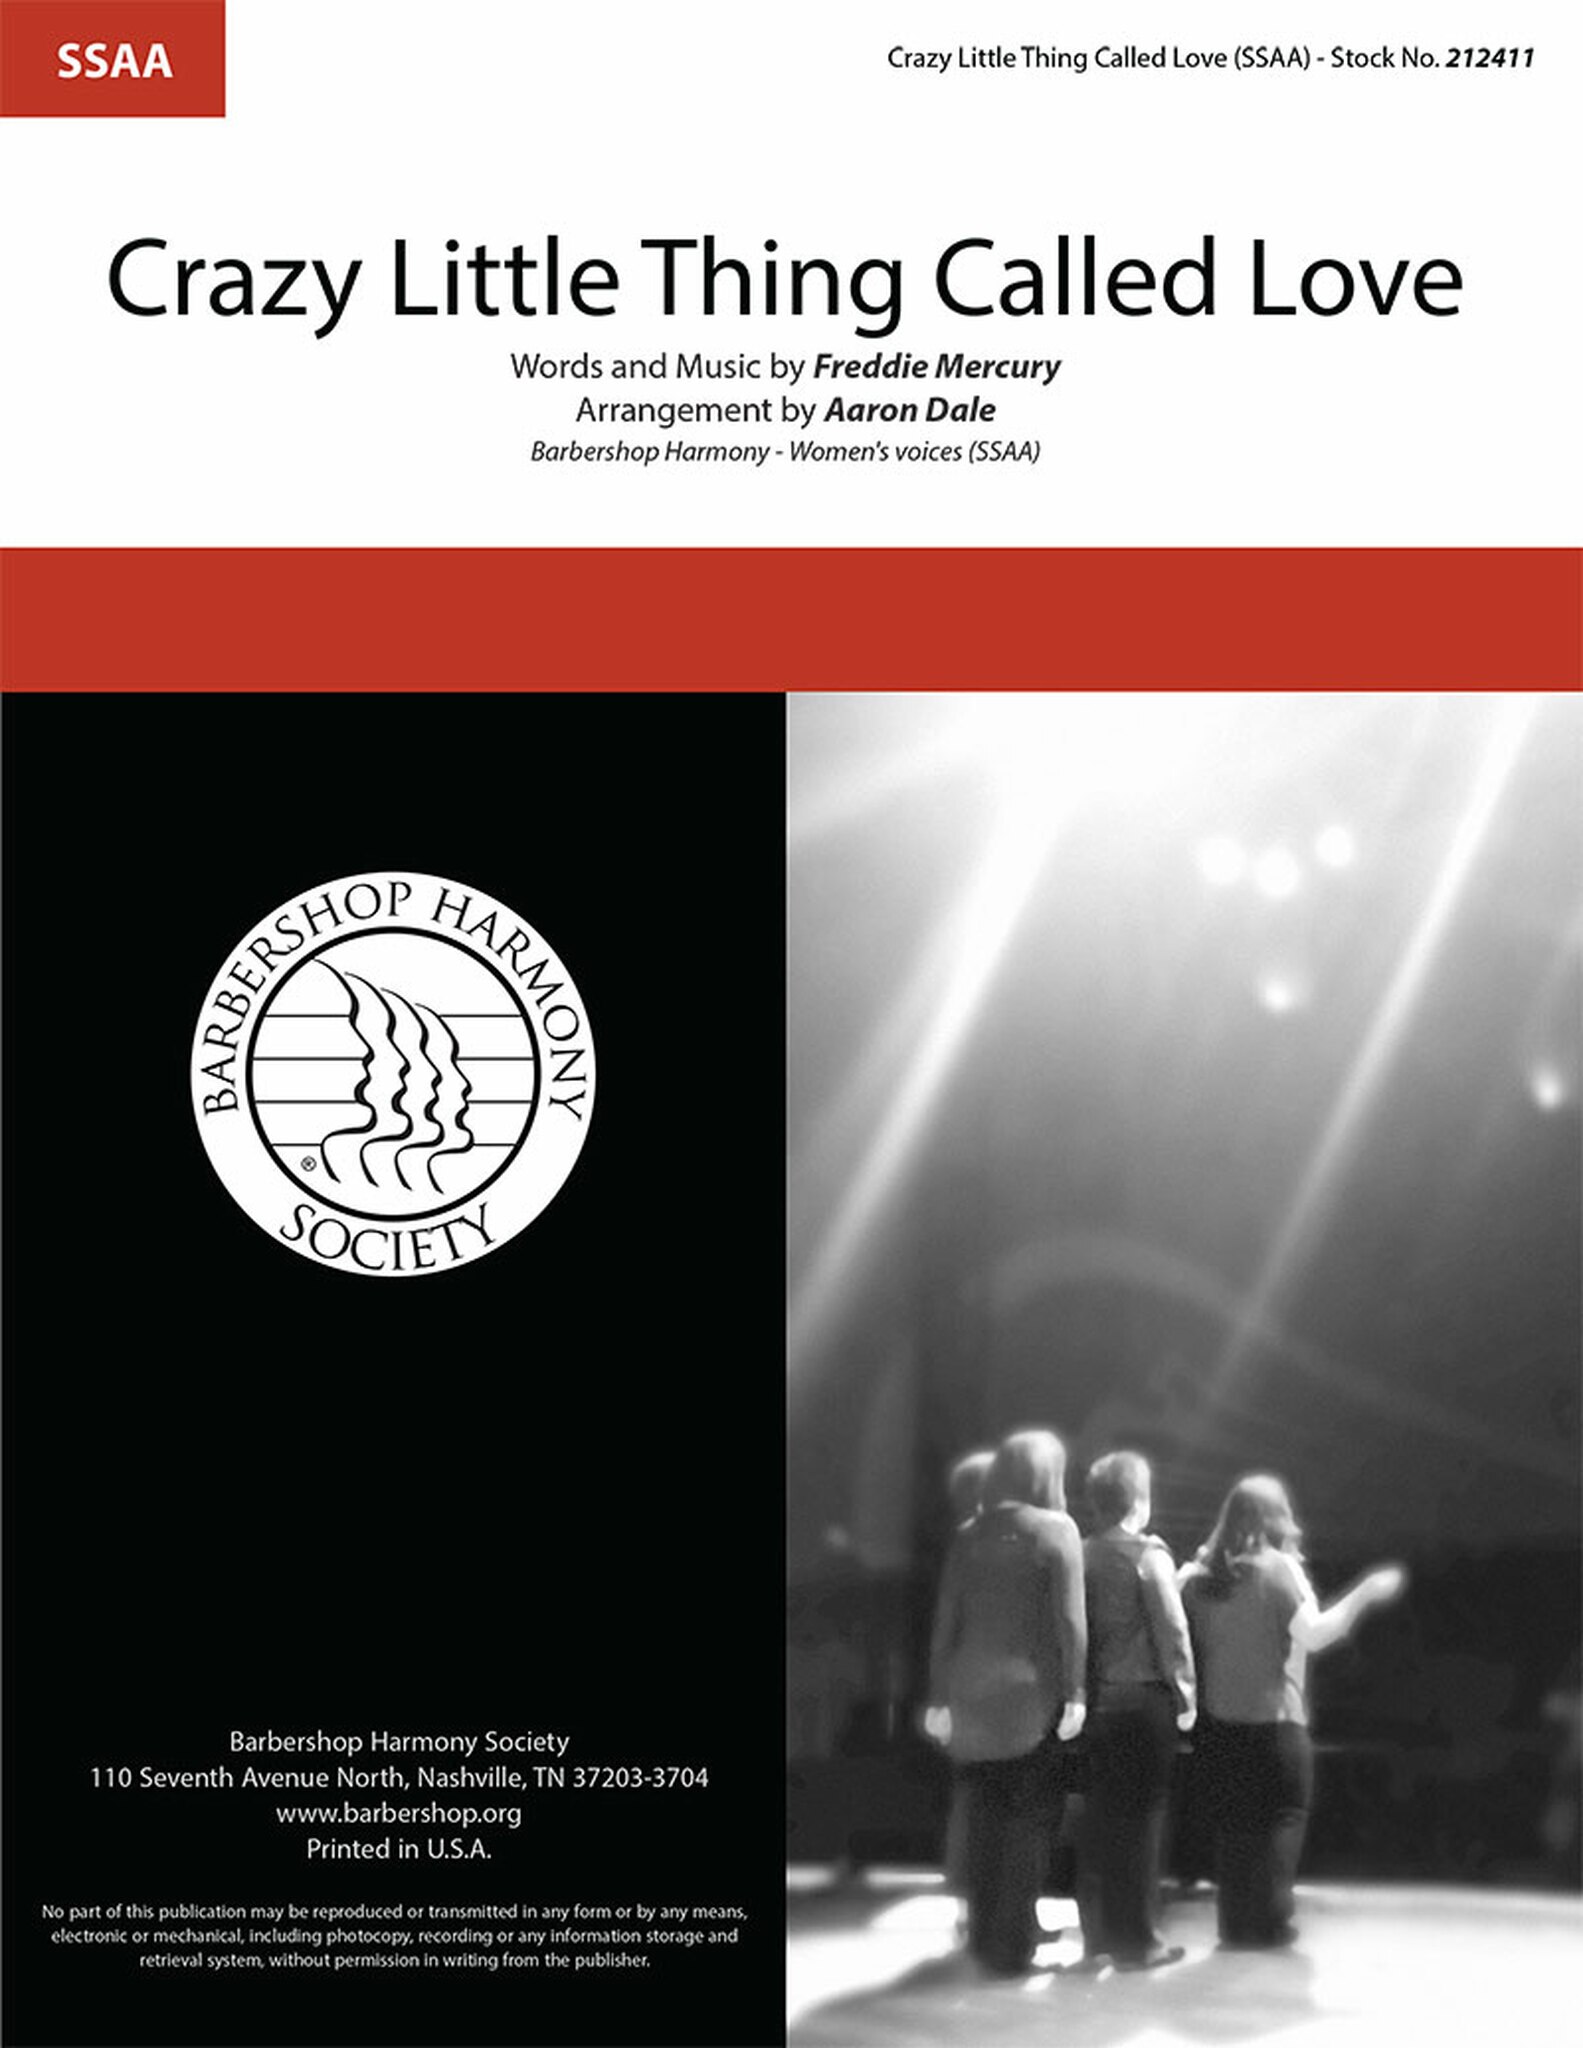 download crazy little thing called love bluray 720p